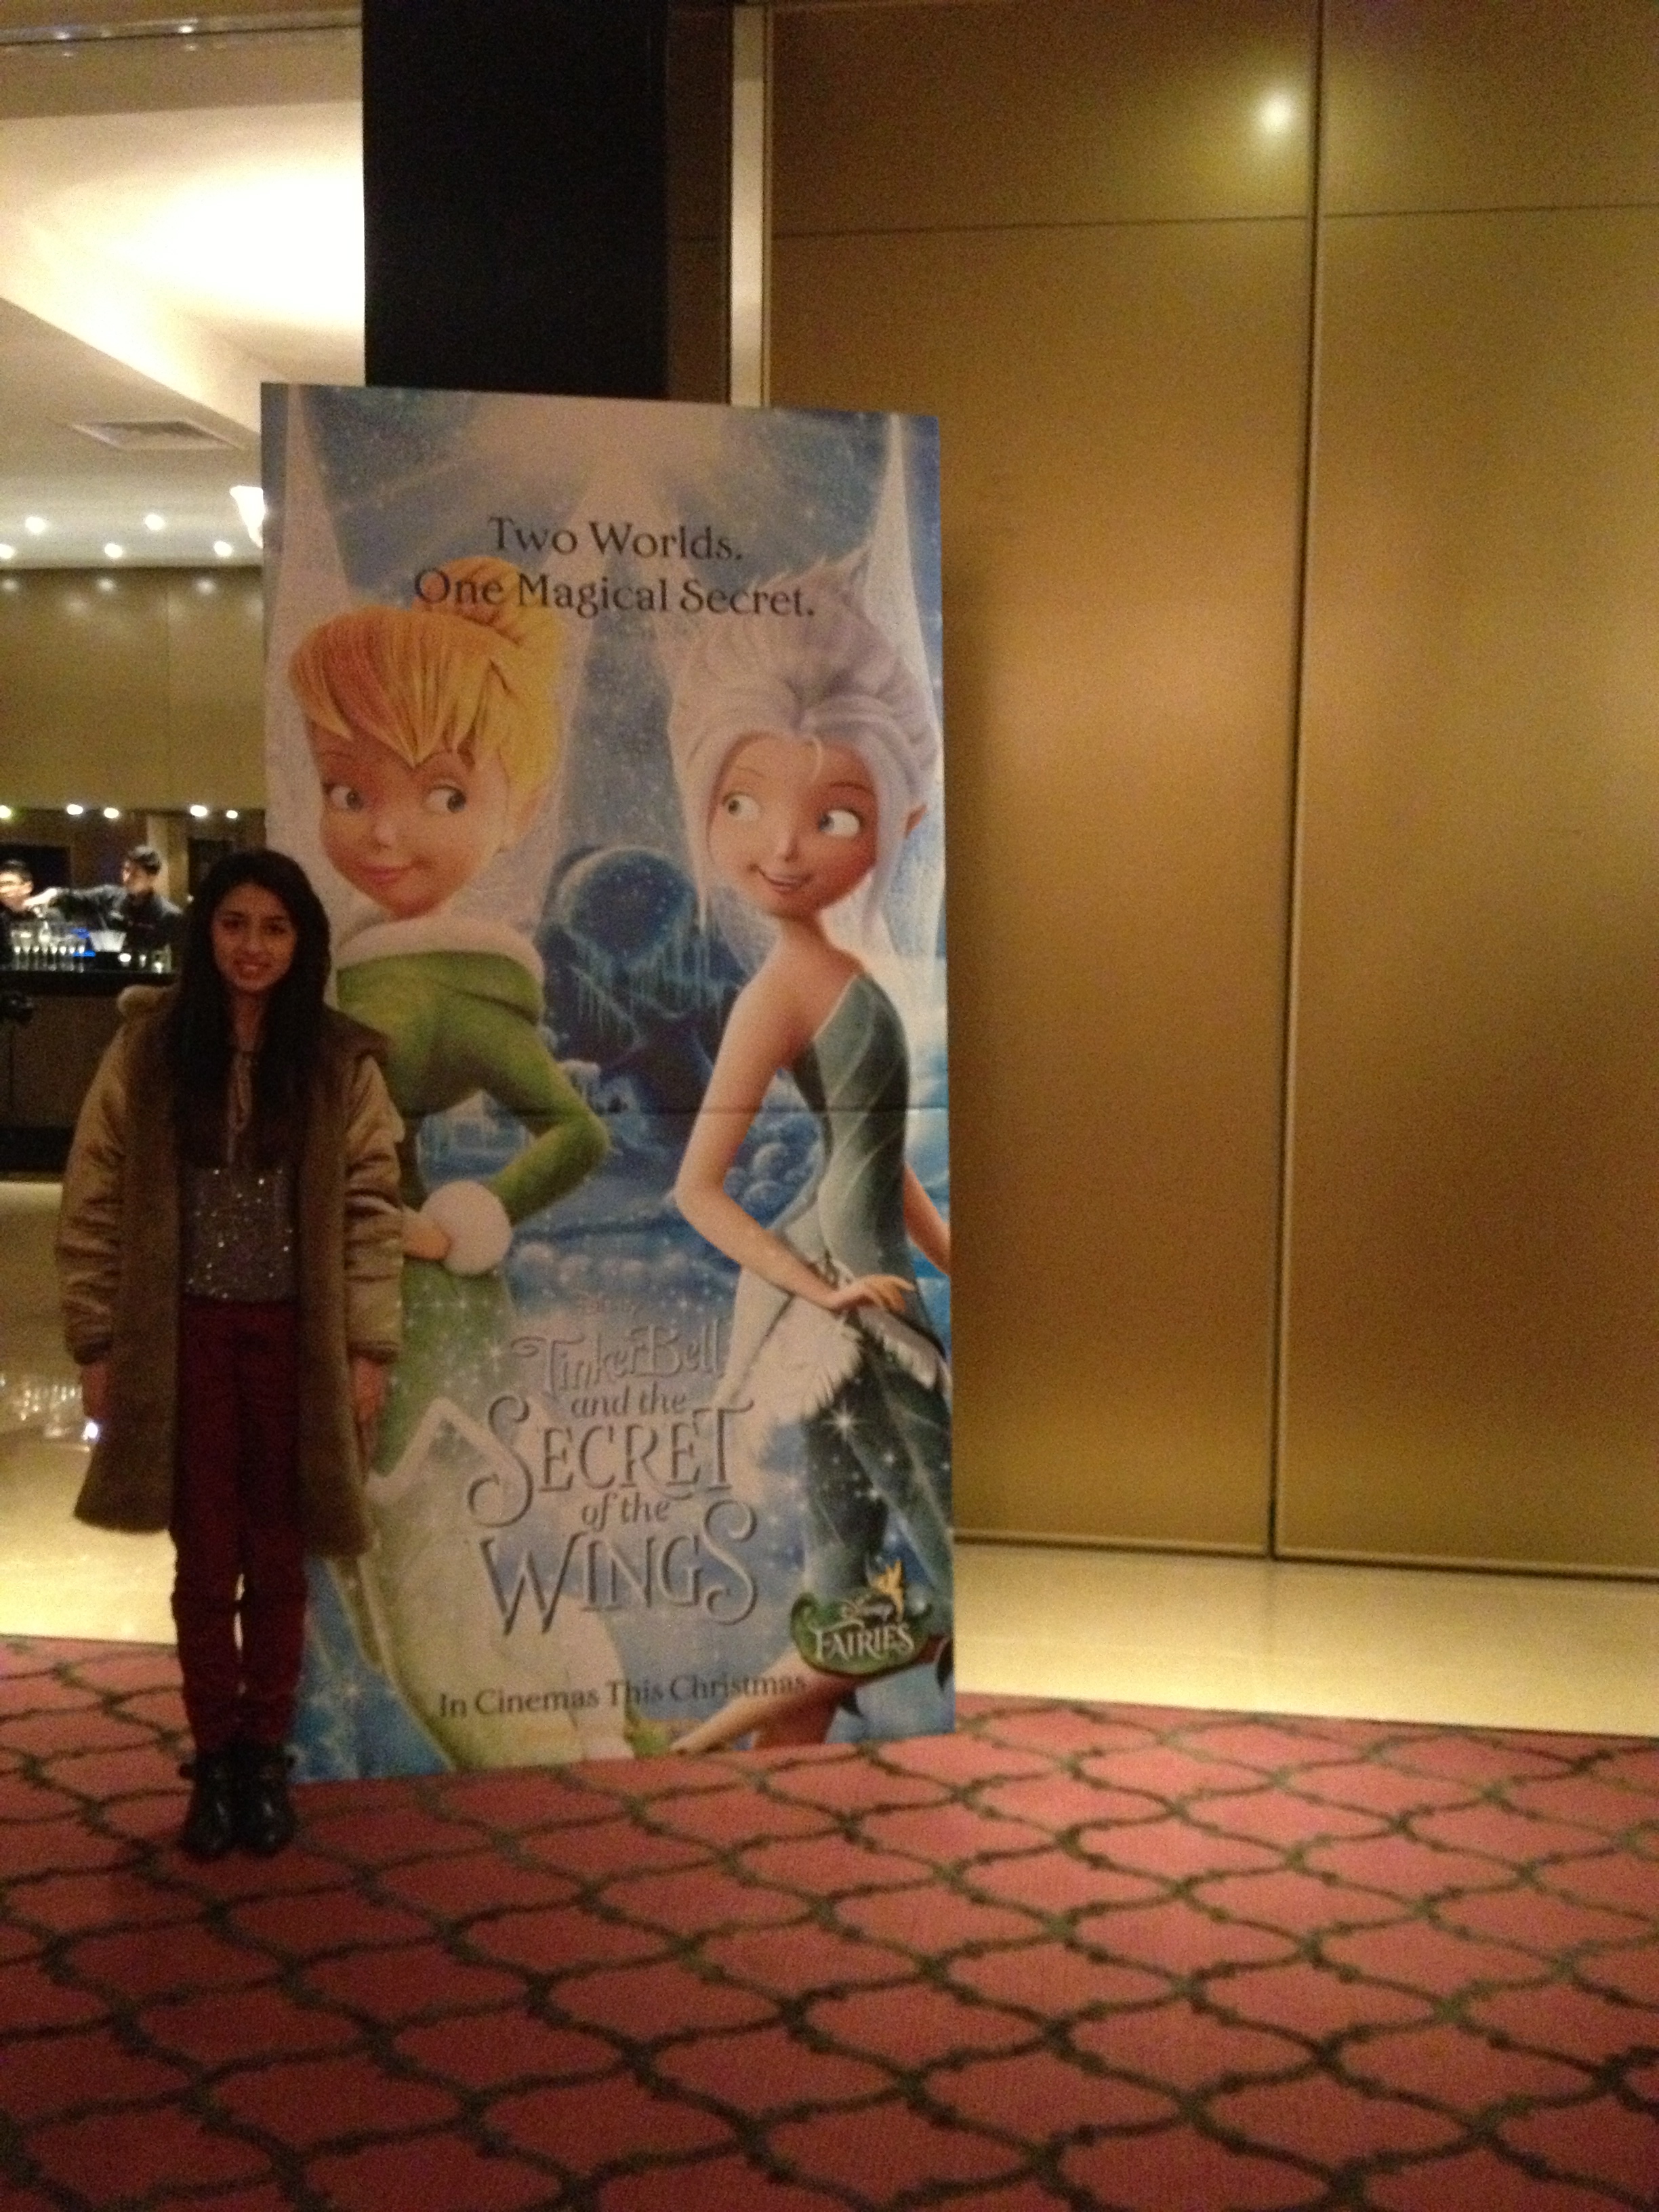 Disney's Tinker Bell and the Secret of the Wings